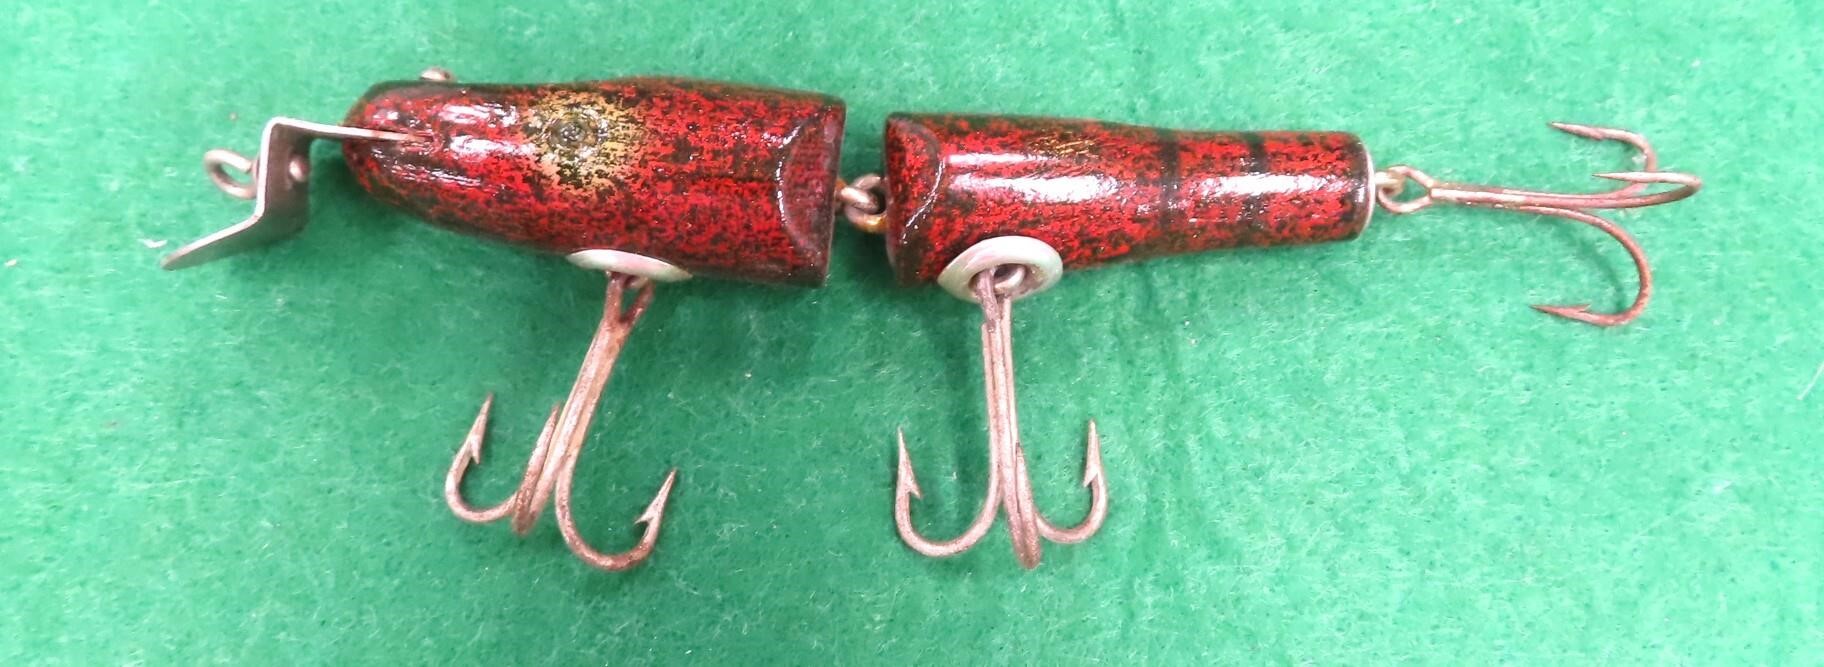 Good Old Fishing Lure, 4.5"L, $75 Price on Tube